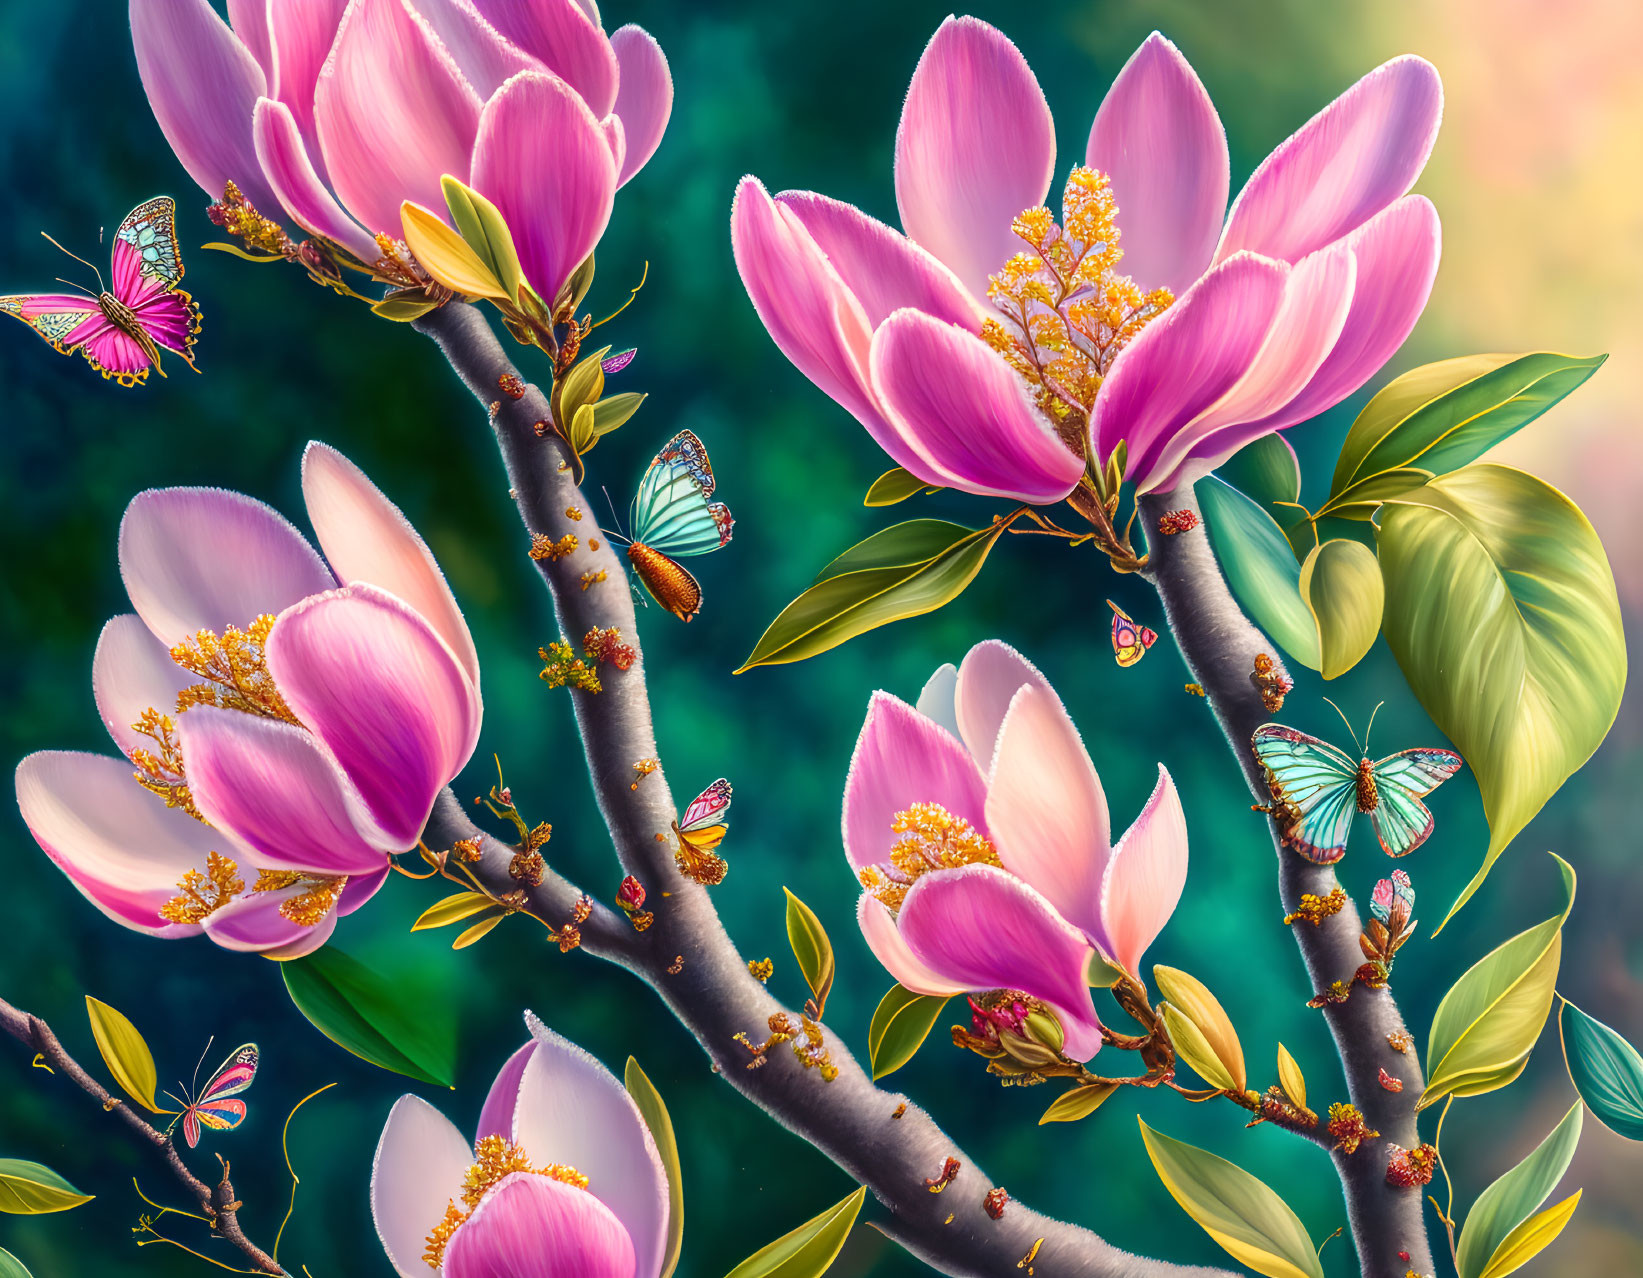 Colorful Magnolia Blossoms and Butterflies on Whimsical Background